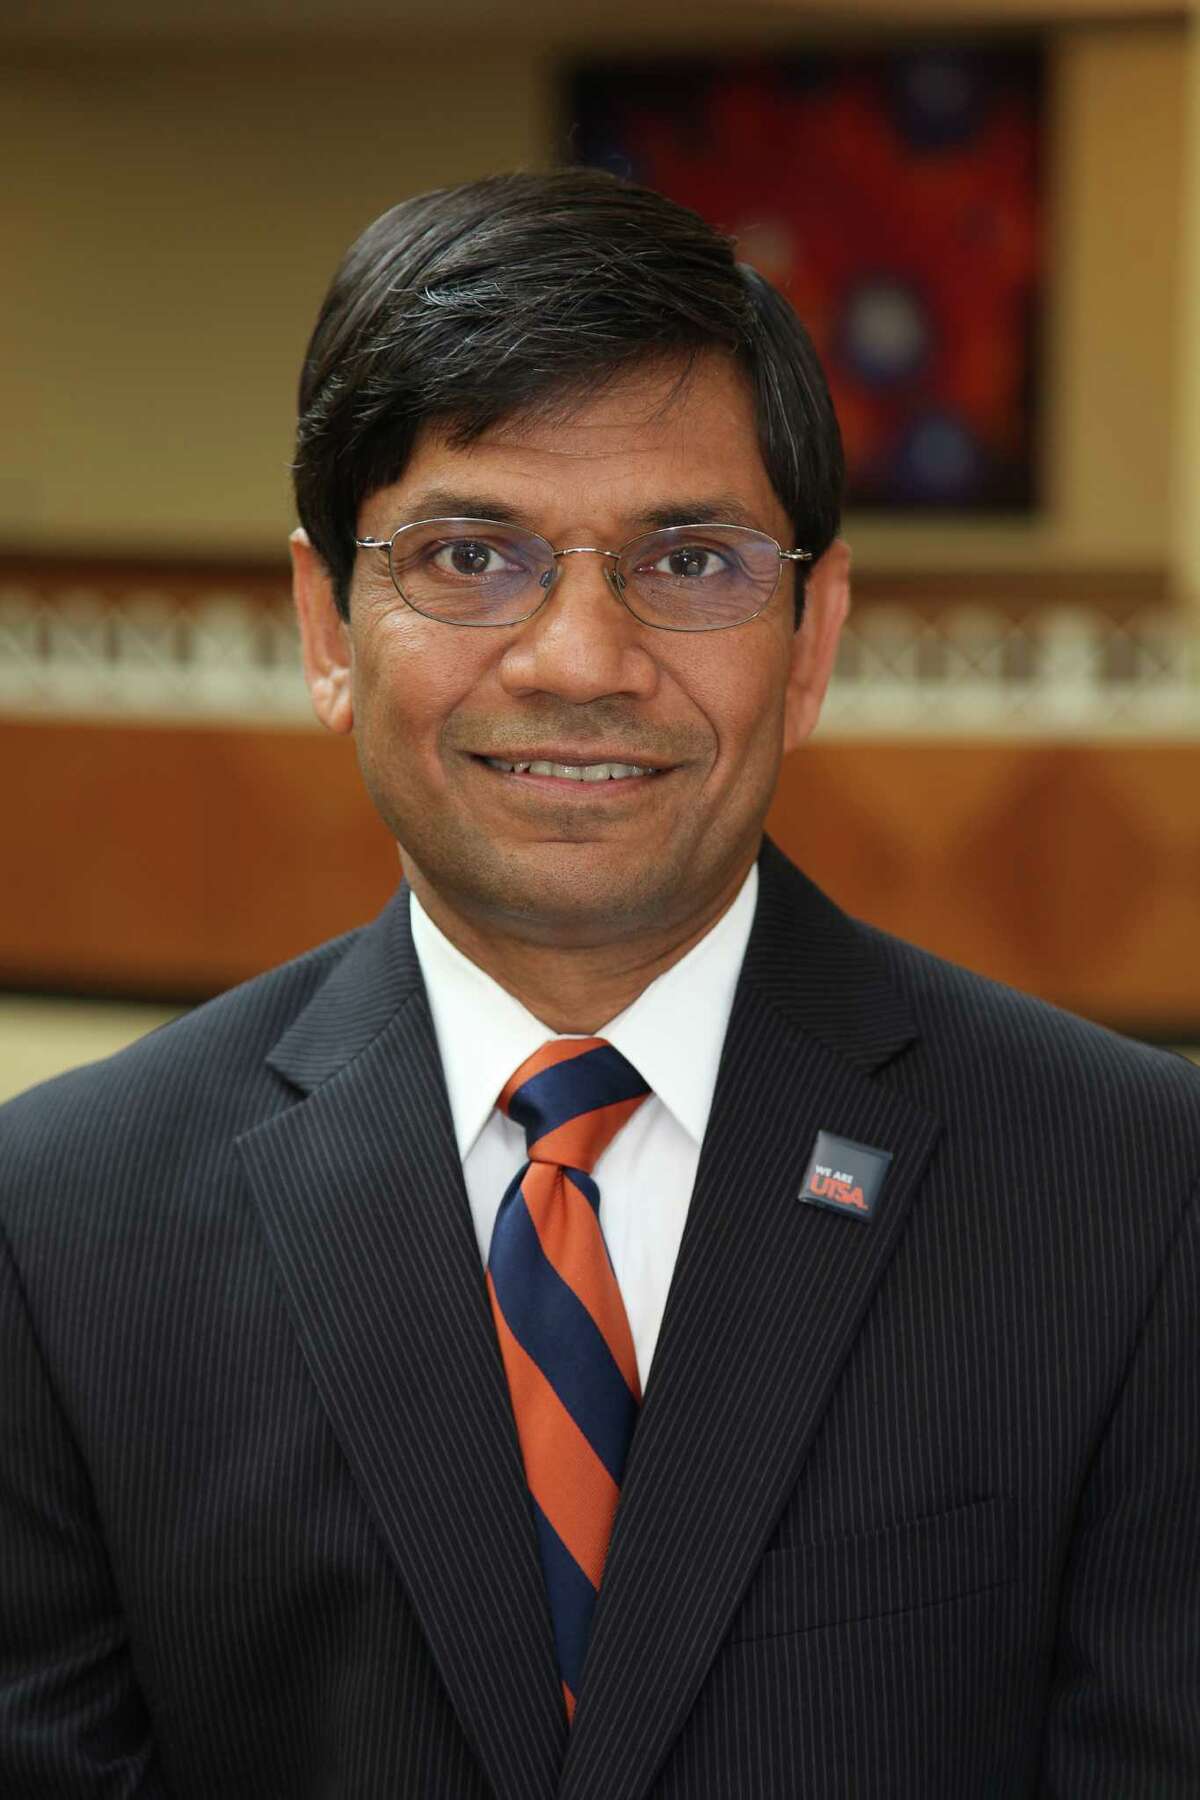 Dr. Mauli Agrawal is the second researcher in San Antonio to be named a fellow of the National Academy of Inventors. He is the vice president for research at the University of Texas at San Antonio. Agrawal was selected for the honor because of his research and innovations in orthopedic and cardiovascular biomaterials and implants.